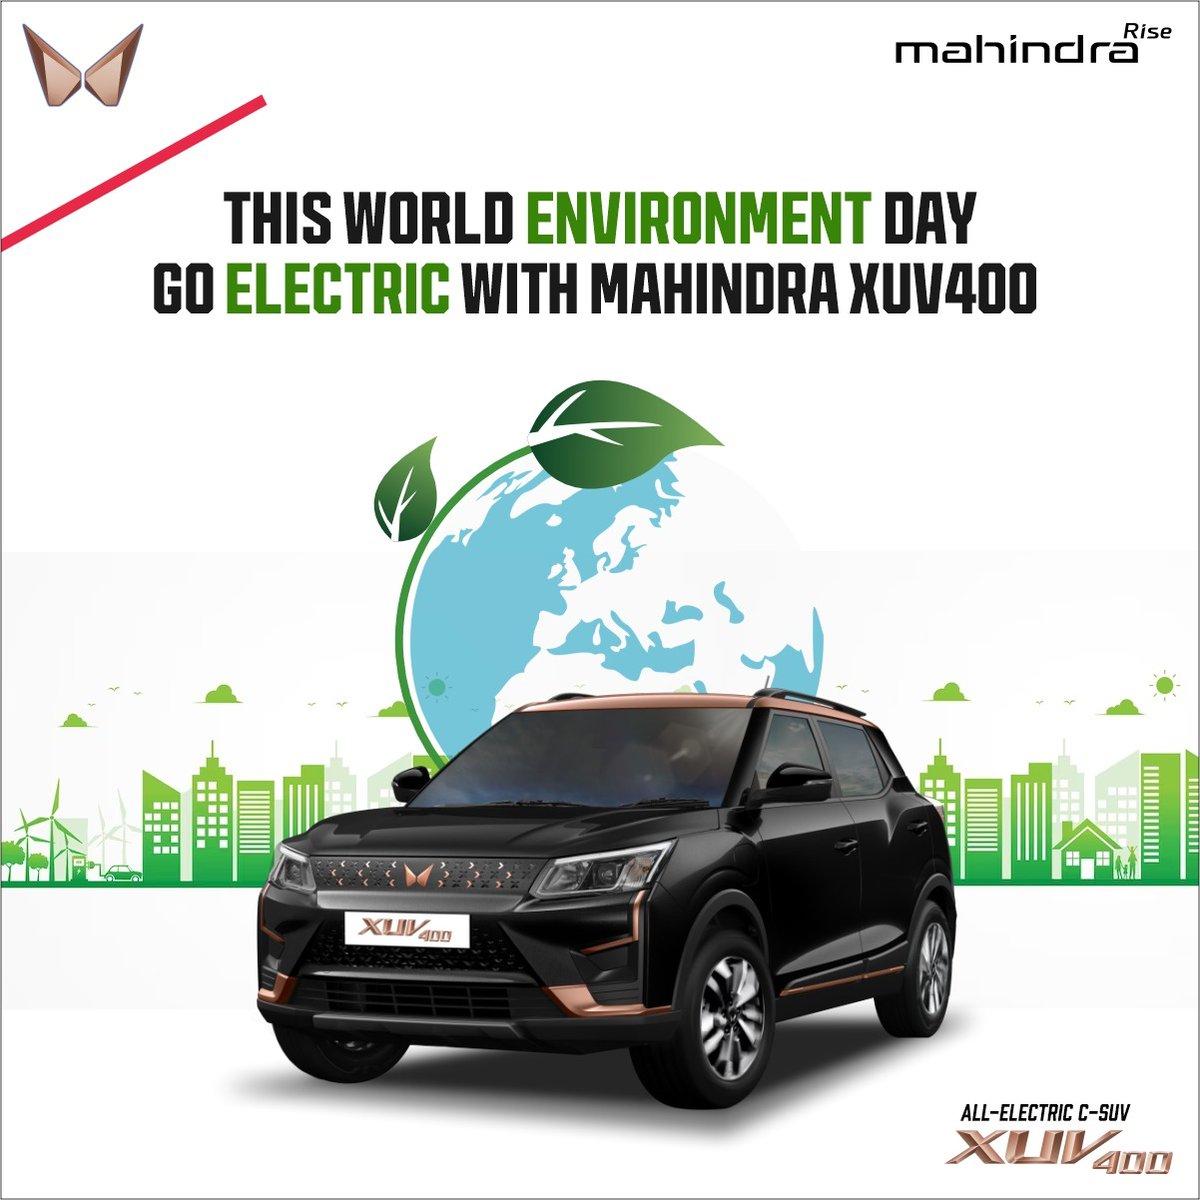 This World Environment Day,
Go Fast Go Electric With Mahindra XUV400.
.
#mahindra #mahindraxuv400ev #ev #evvehicle #electric
#Mahindra #WithYouHamesha
#Stay Safe_Go Digital
- For more information visit on :-
- mosaramenterprises.com
#WithYouHamesha 8929172594, 7302748130